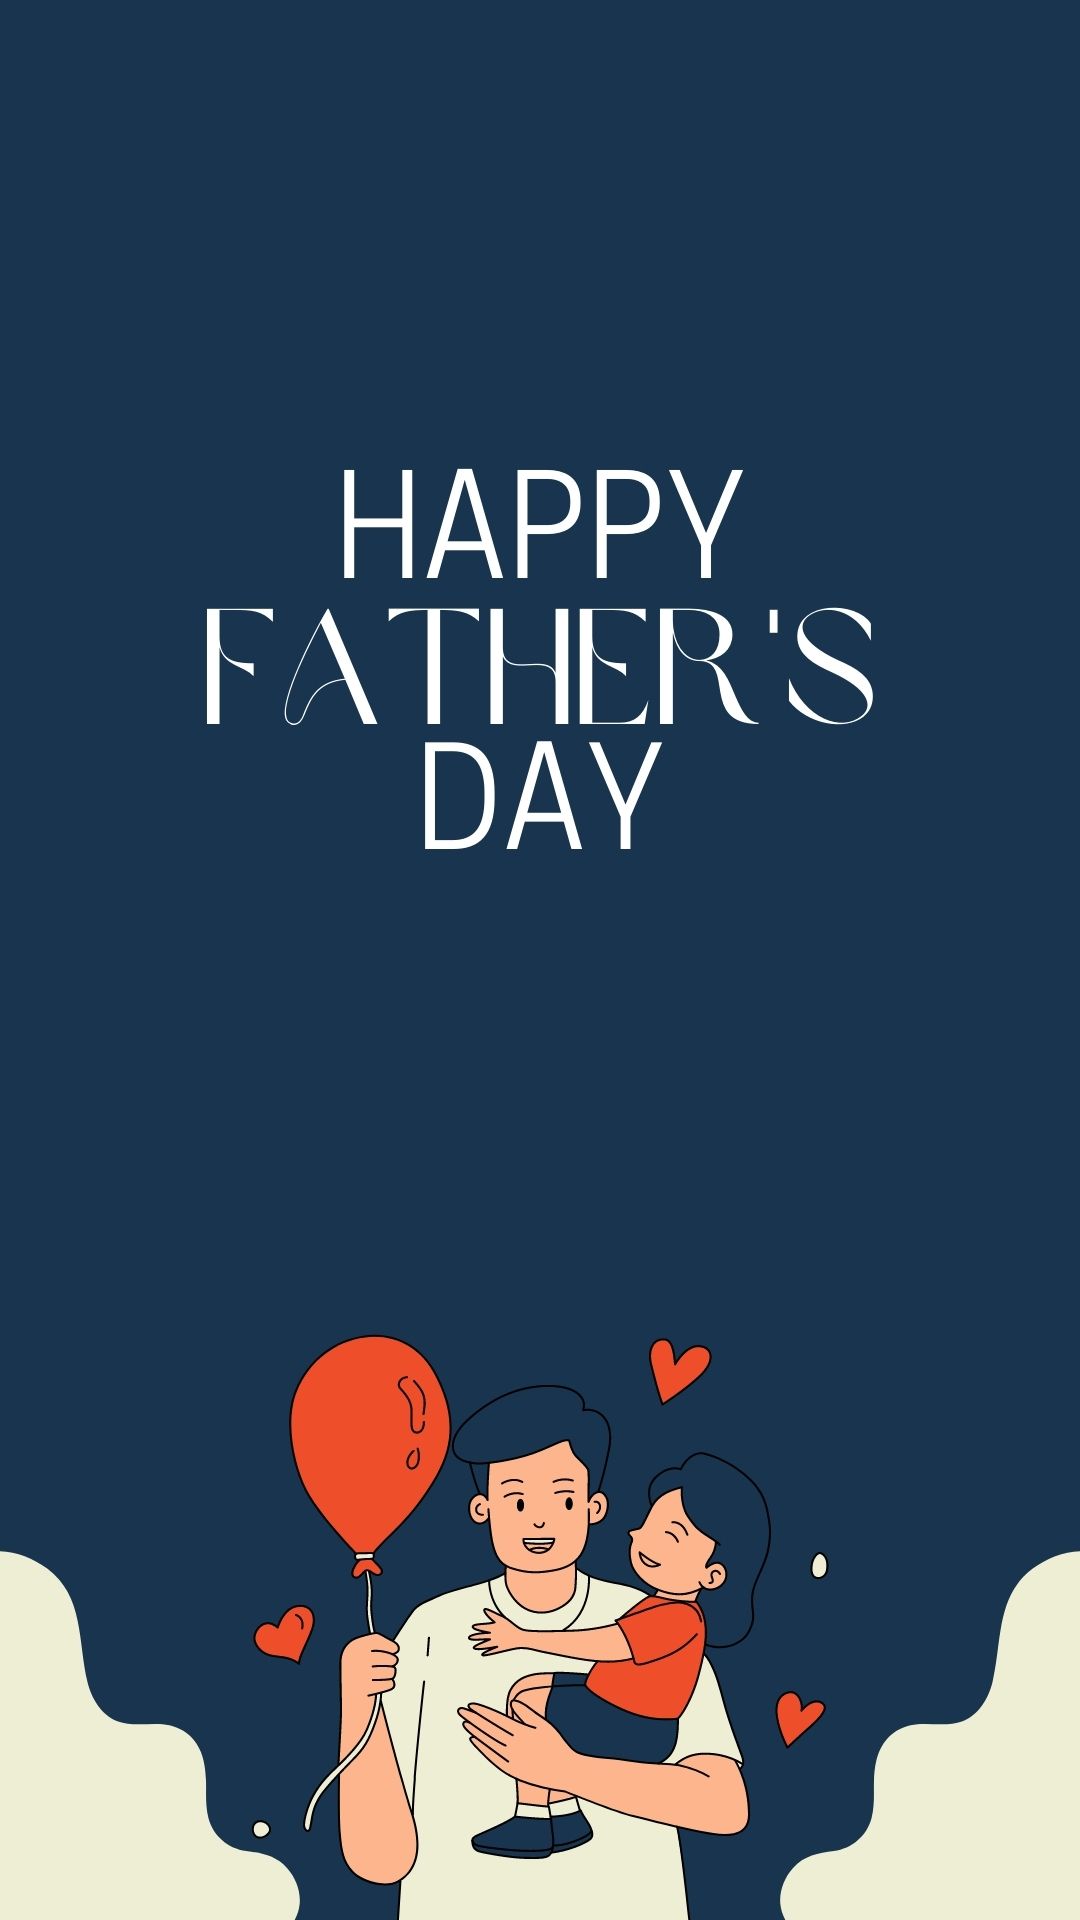 best happy father's day wishes images for instagram story (19)